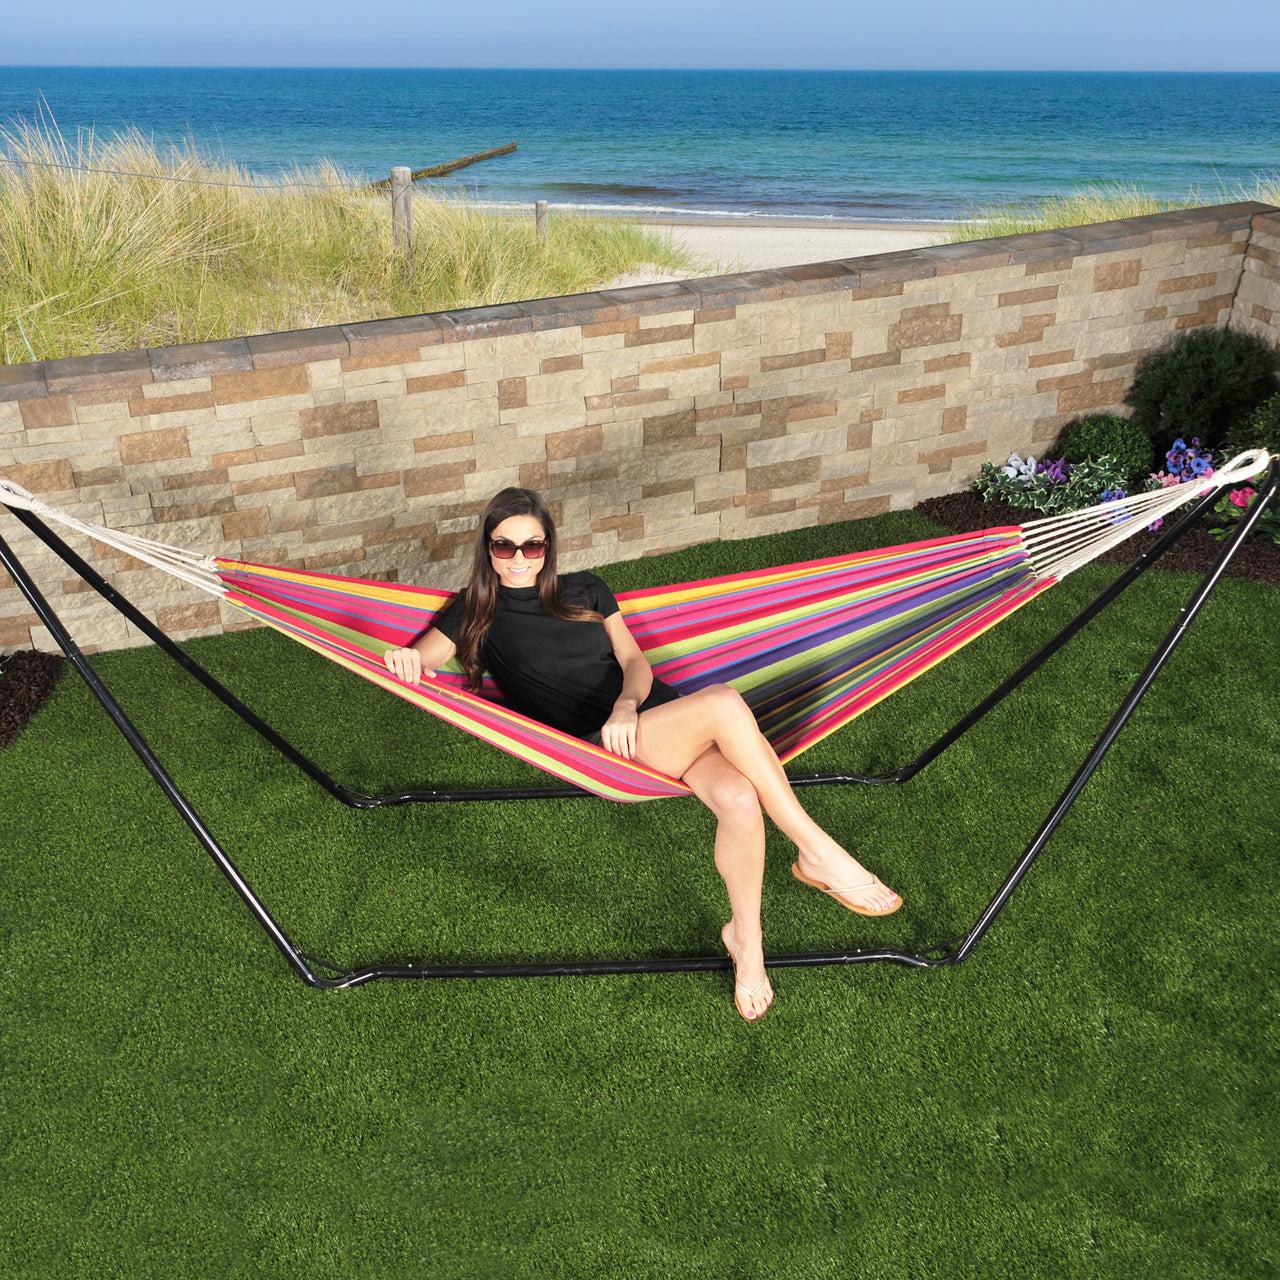 Woman sitting in a Bliss Hammocks Multi-Color hammock attached to the Bliss Hammocks 10-foot Hammock Stand with Hanging hooks. She is in an enclosed yard with the beach and the ocean in the background.